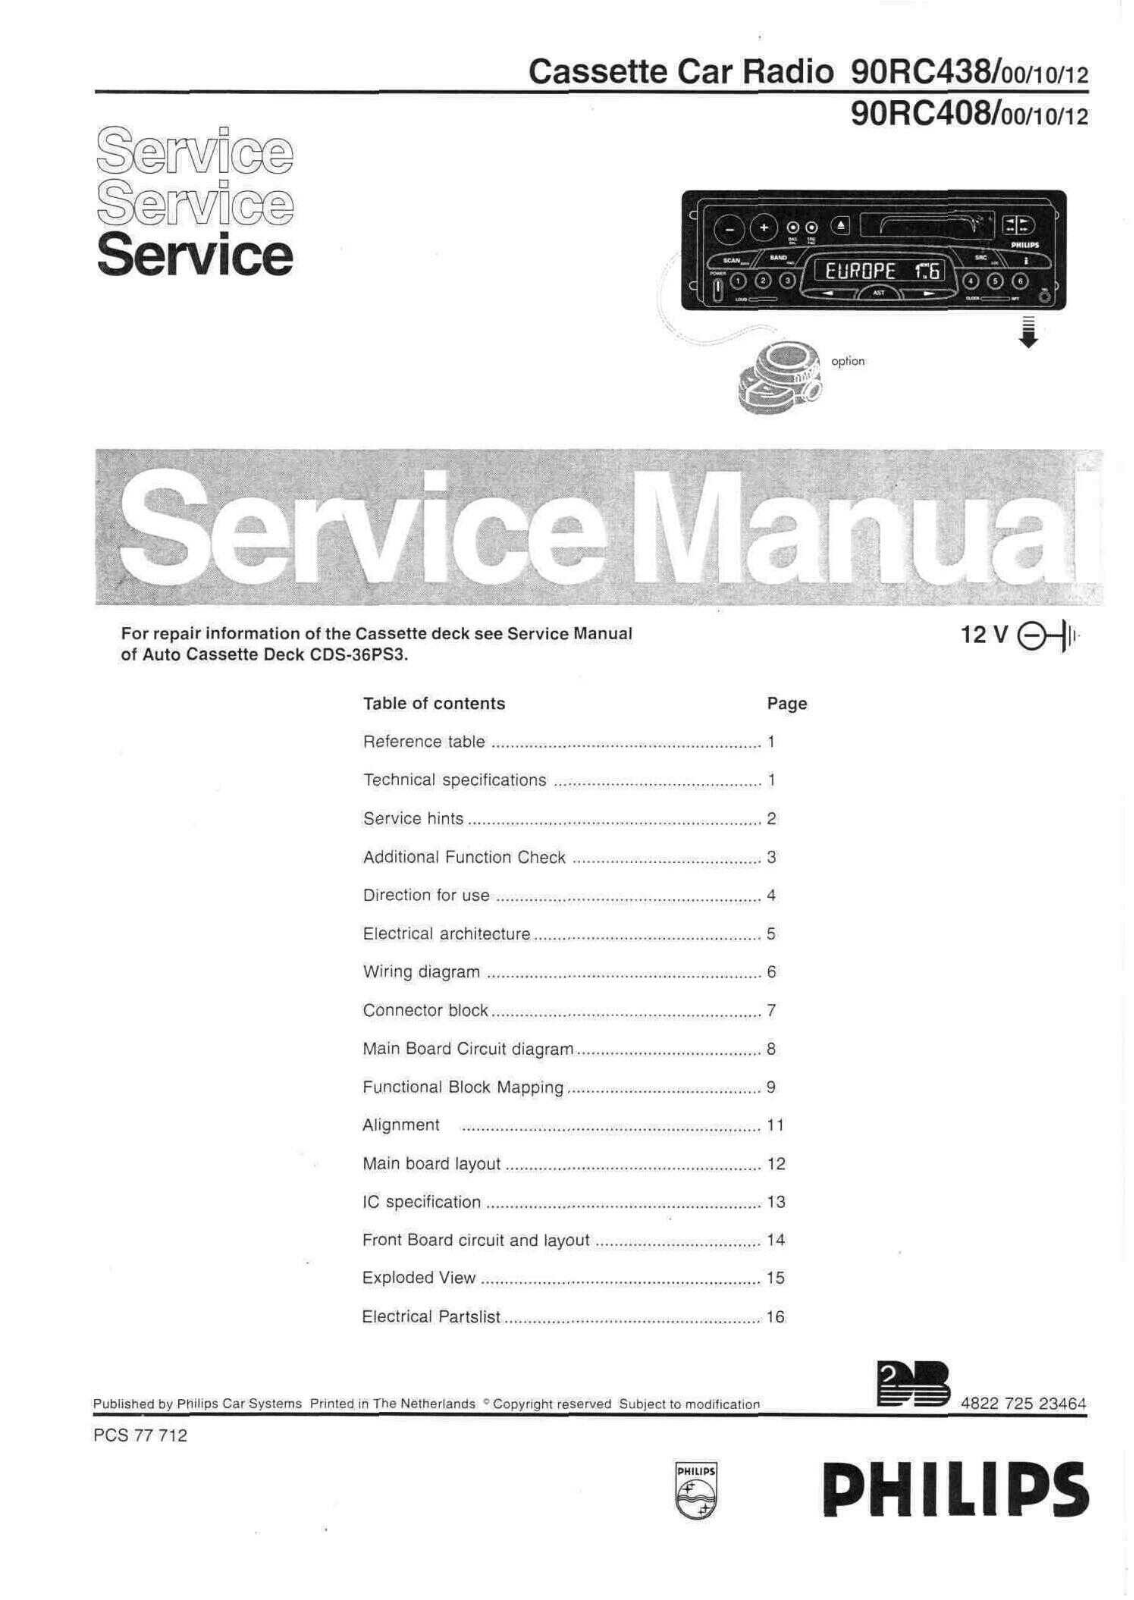 PHILIPS 90RC438-00, 90RC438-10, 90RC438-12, 90RC408-00, 90RC408-10 Service Manual